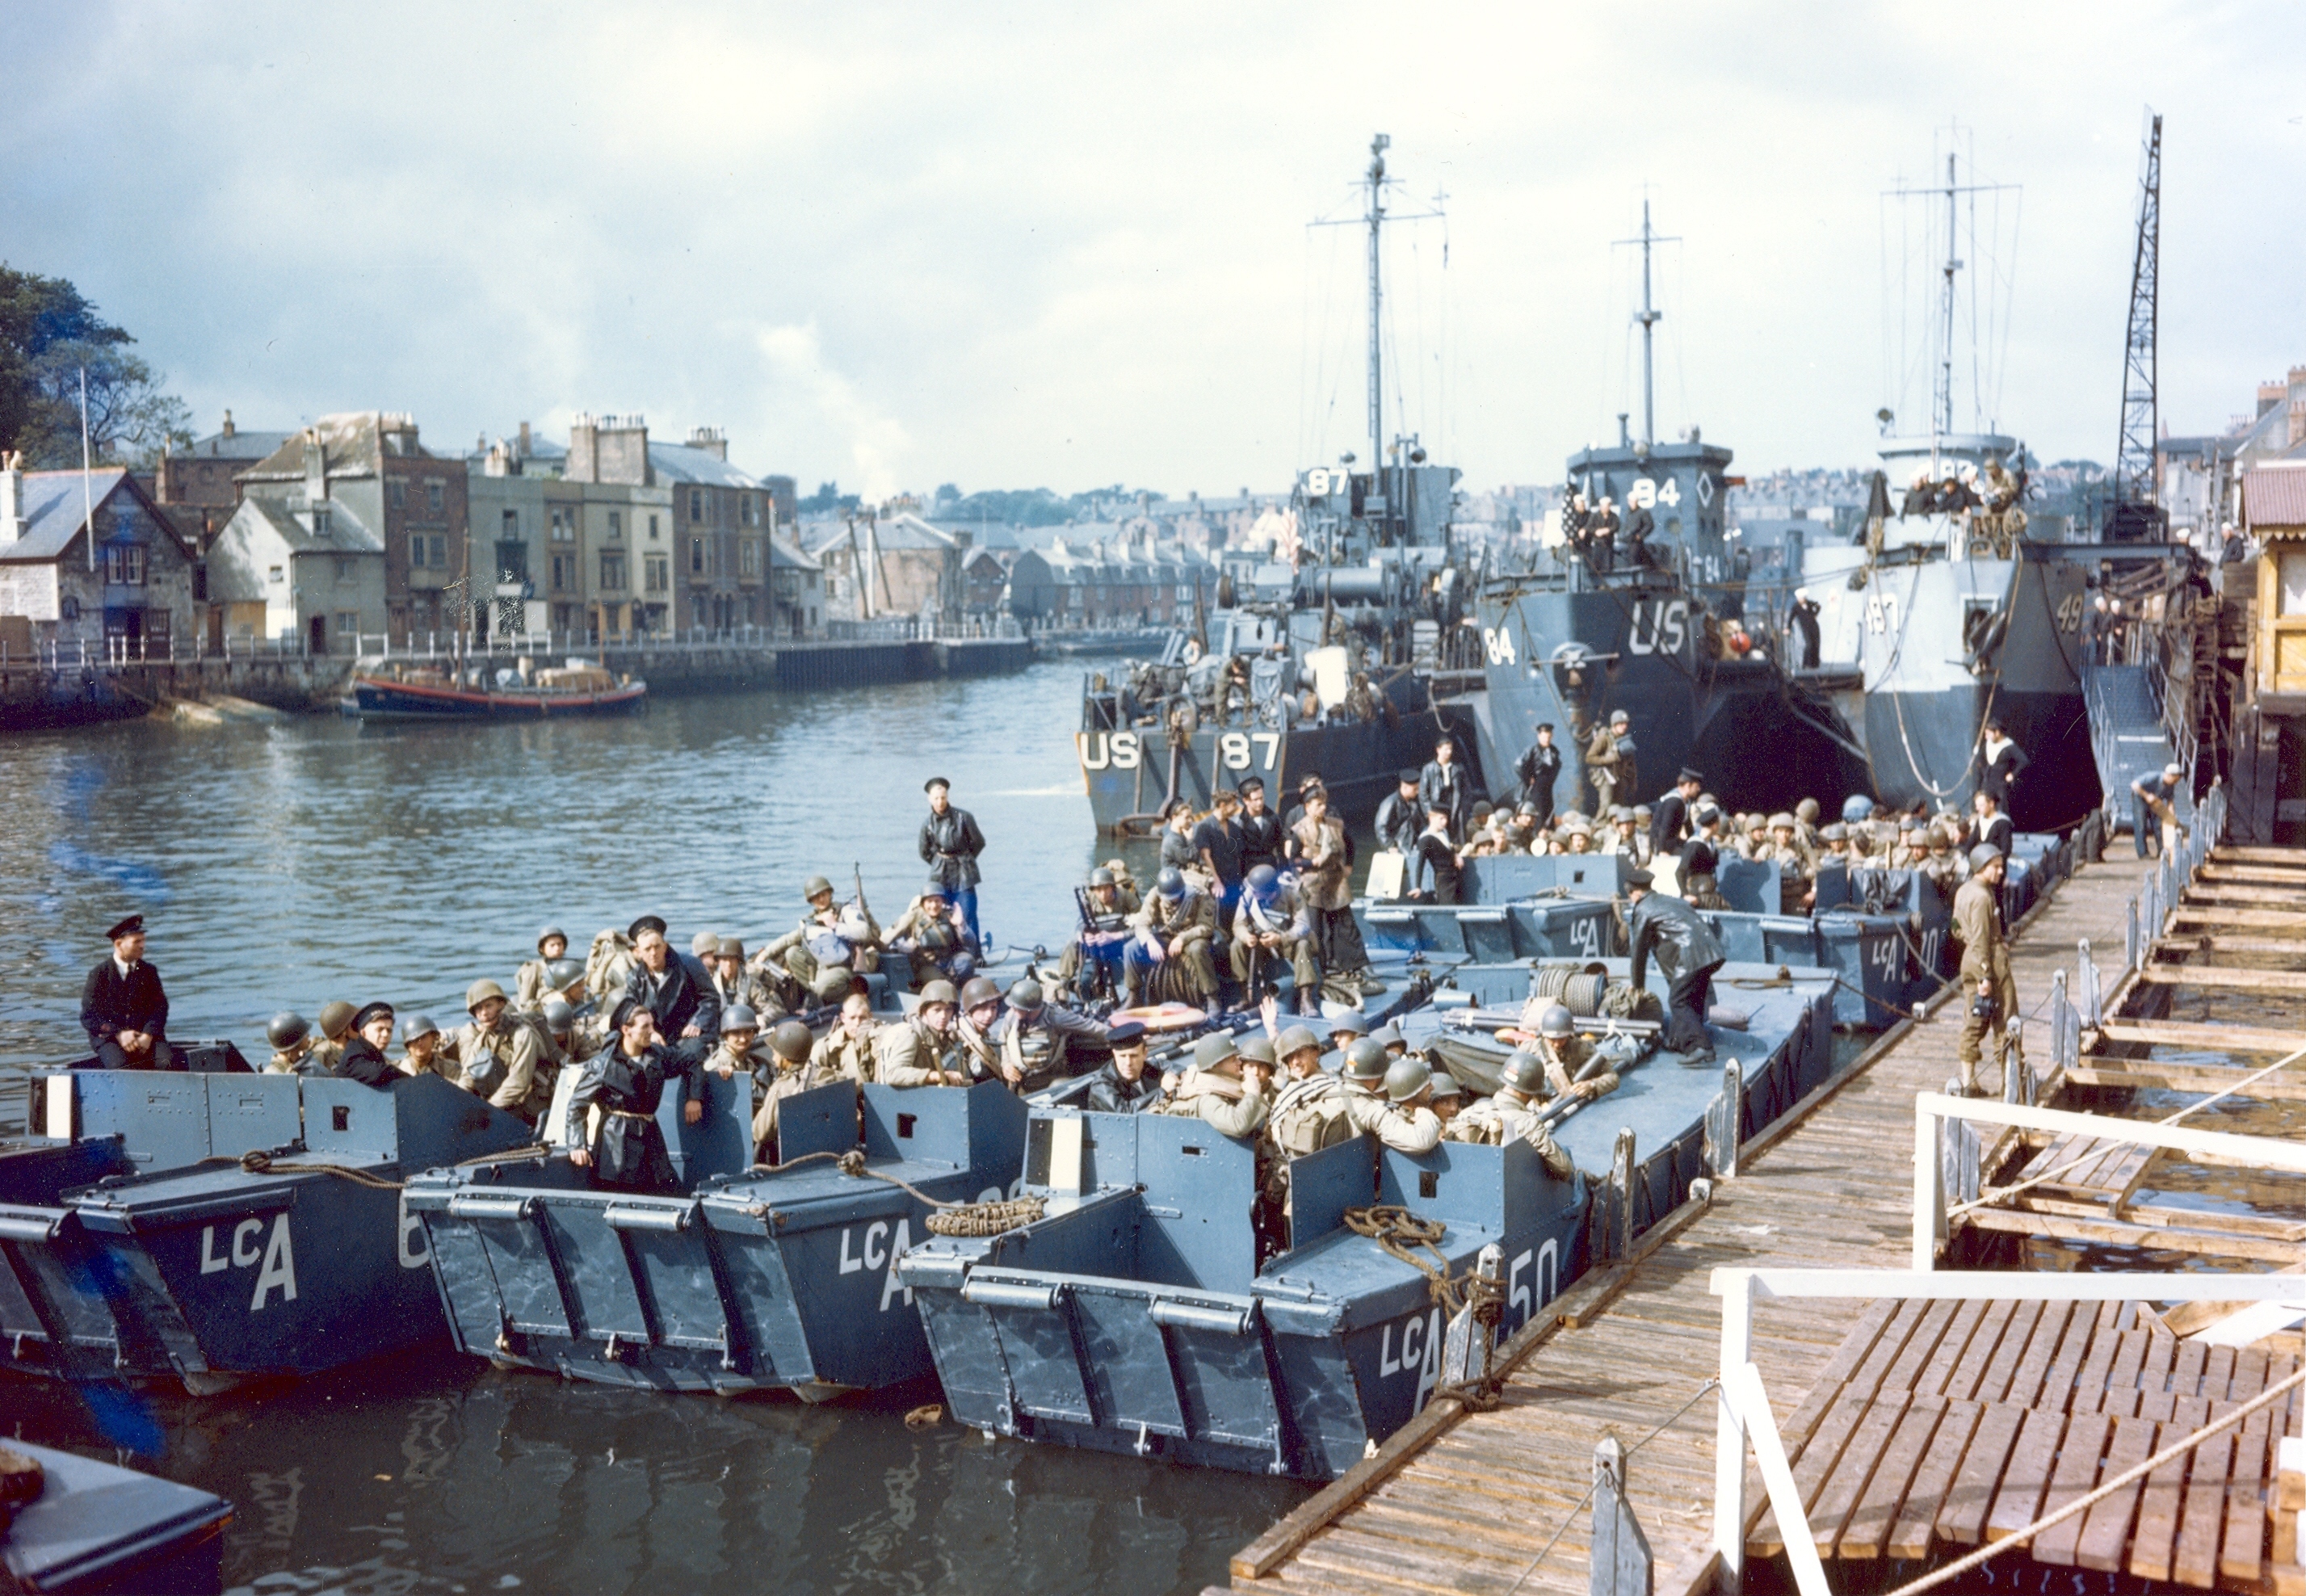 British landing craft, US Army troops, and US Coast Guard LCI(L)s staged at Weymouth, Dorset, England, United Kingdom prior to the Normandy invasion, June 1944.